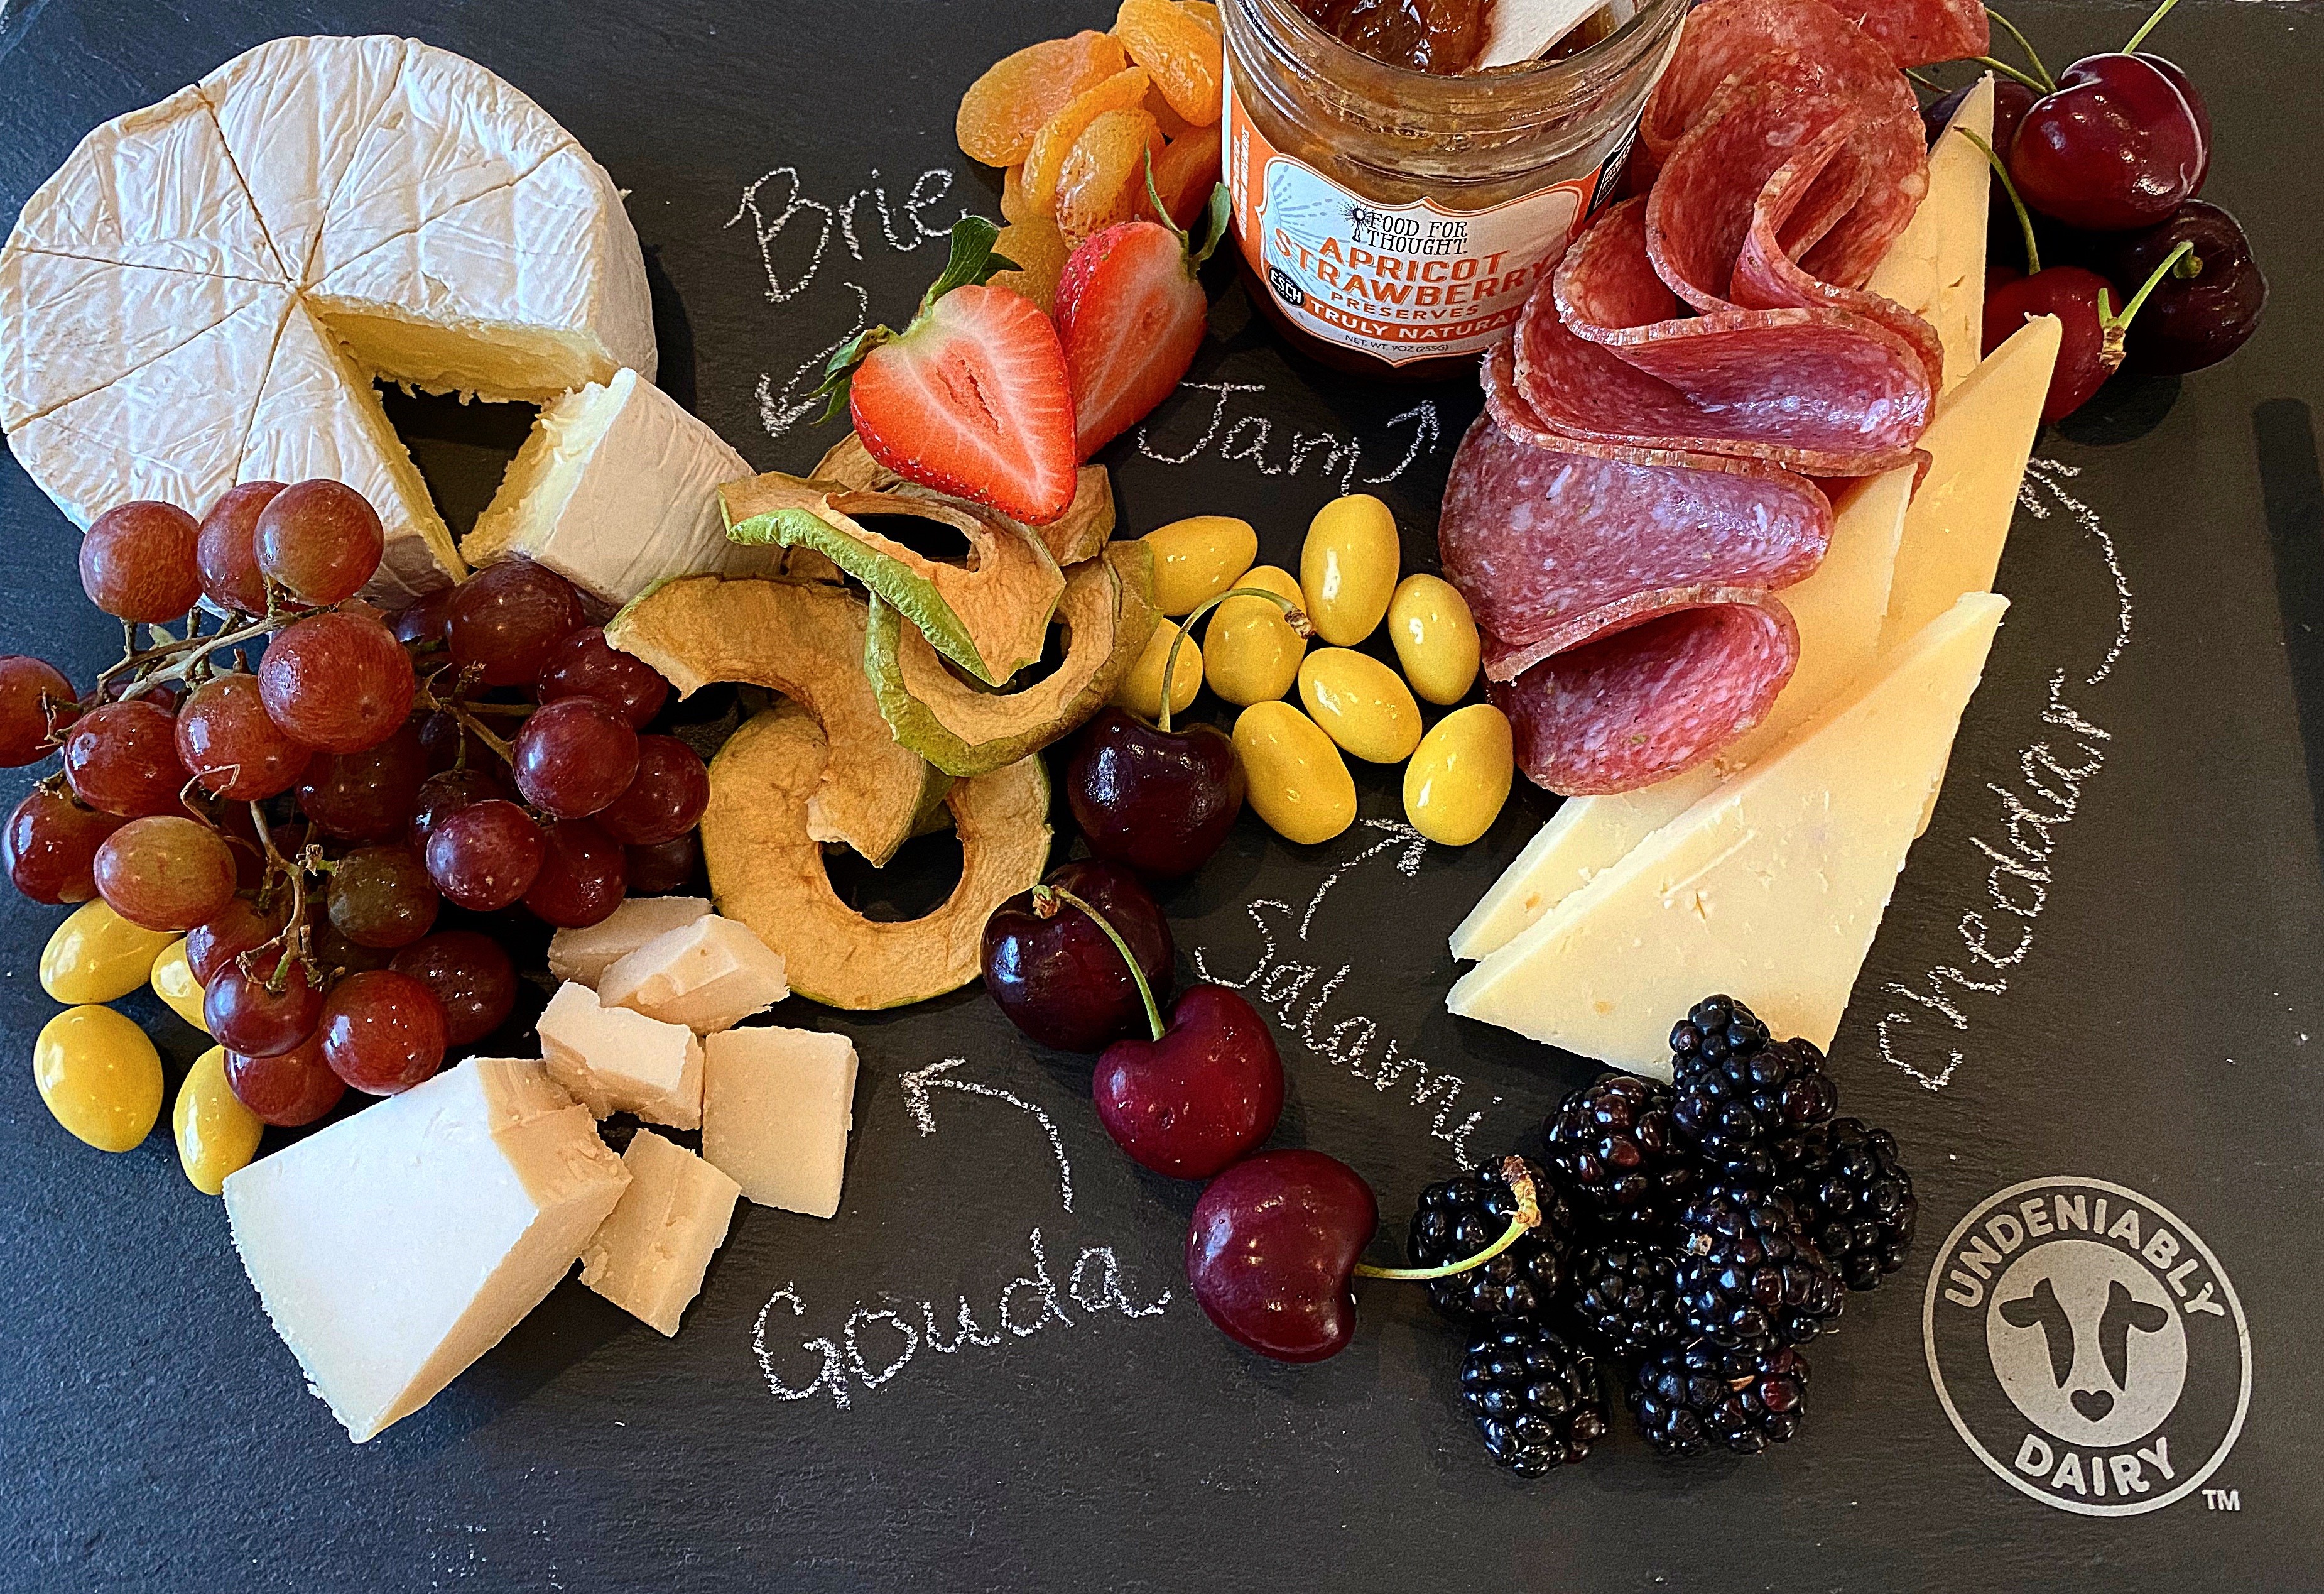 A cheese board has a range of cheese, meat, vegetables, fruits and grain items on the side. (Photo courtesy of Midwest Dairy)